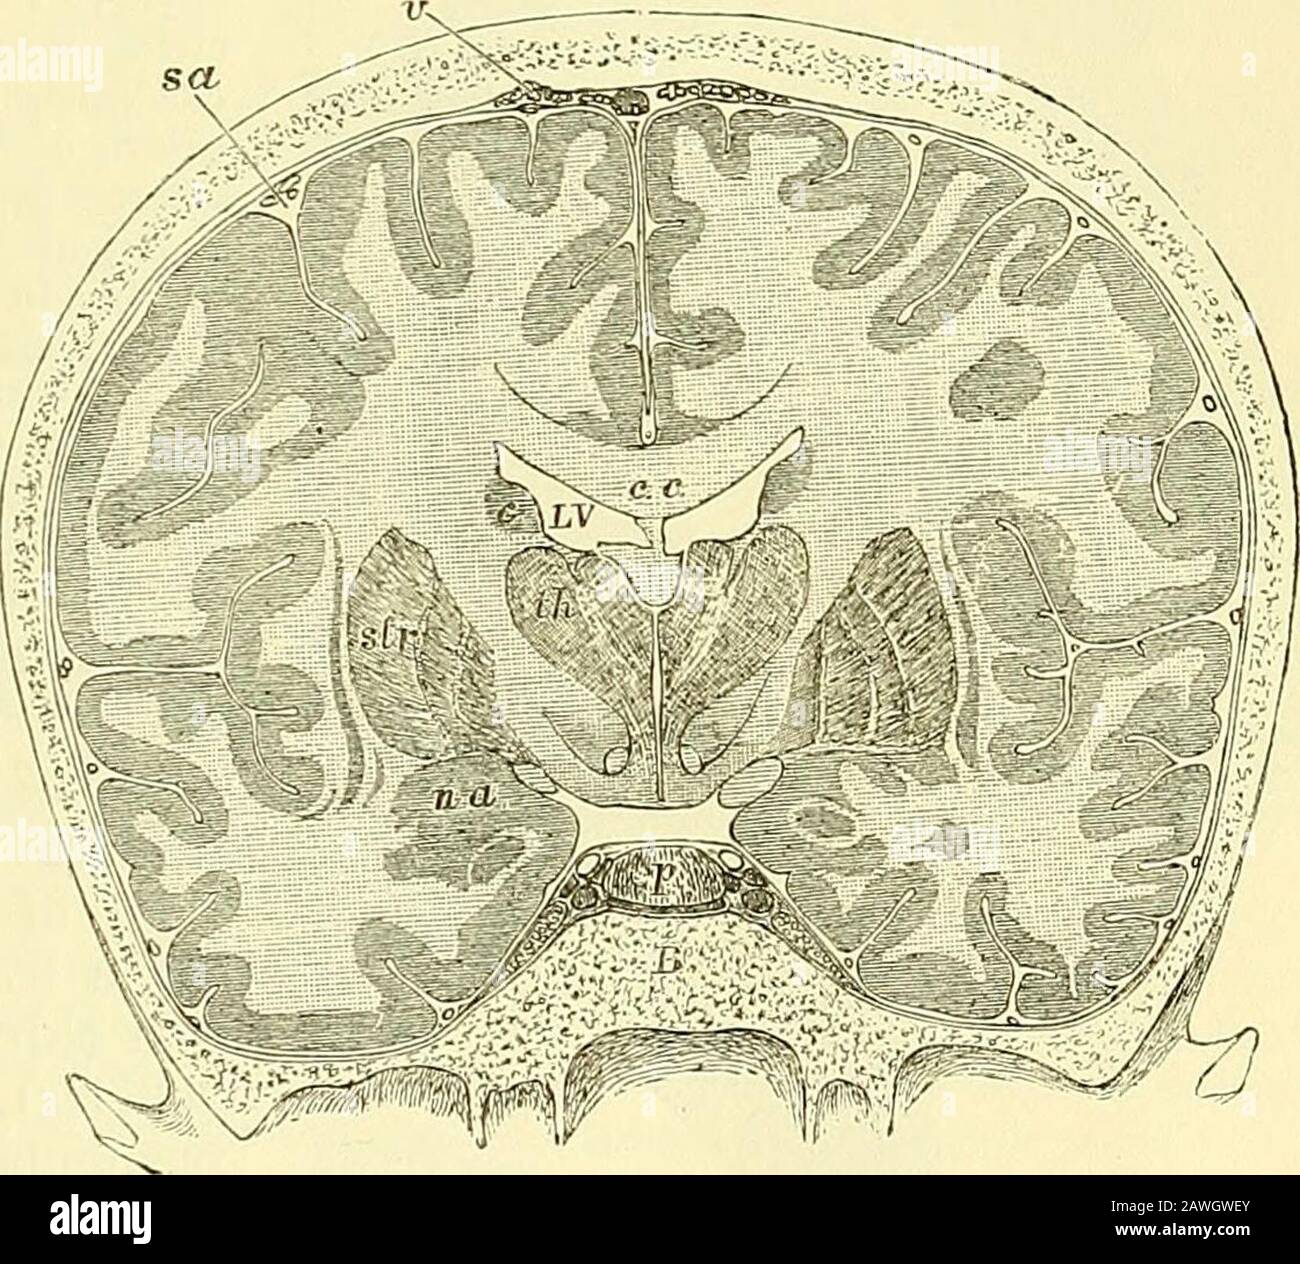 Quain's elements of anatomy . d into the straight sinus, having generally first unitedinto a single trunk. The corpora striata {ganglia of the cerebral hemispheres), situated infront and to the outer side of the optic thalami, are two large ovoid Fig. 306. — Trans- Fig. 306. VEKSE SECTION THROUGH THE BRAINAND SKULL MADE WHILST FROZEN (Keyand Retzius). J c, c, corpus callo-sum ; below its middlepart the septum luci-dum, and below thatagain the fornix ; L V,lateral ventricle ; th,thalamus; between thetwo thalami the thirdventricle is seen; belowthe thalamus is thesubstantia innominata;sir, lenti Stock Photo